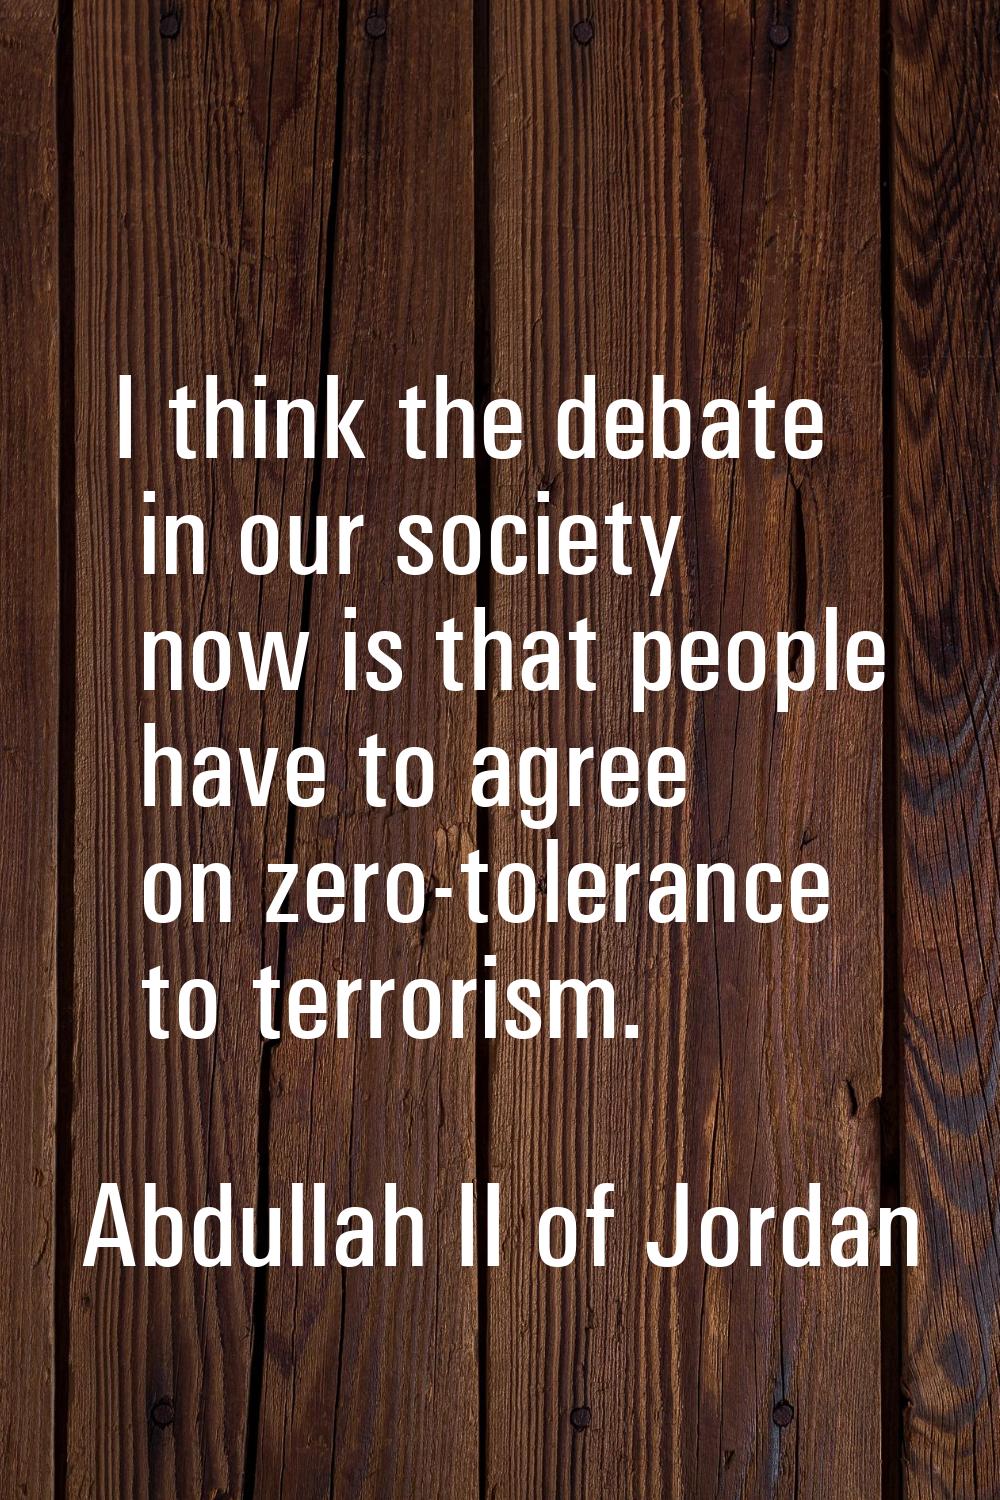 I think the debate in our society now is that people have to agree on zero-tolerance to terrorism.